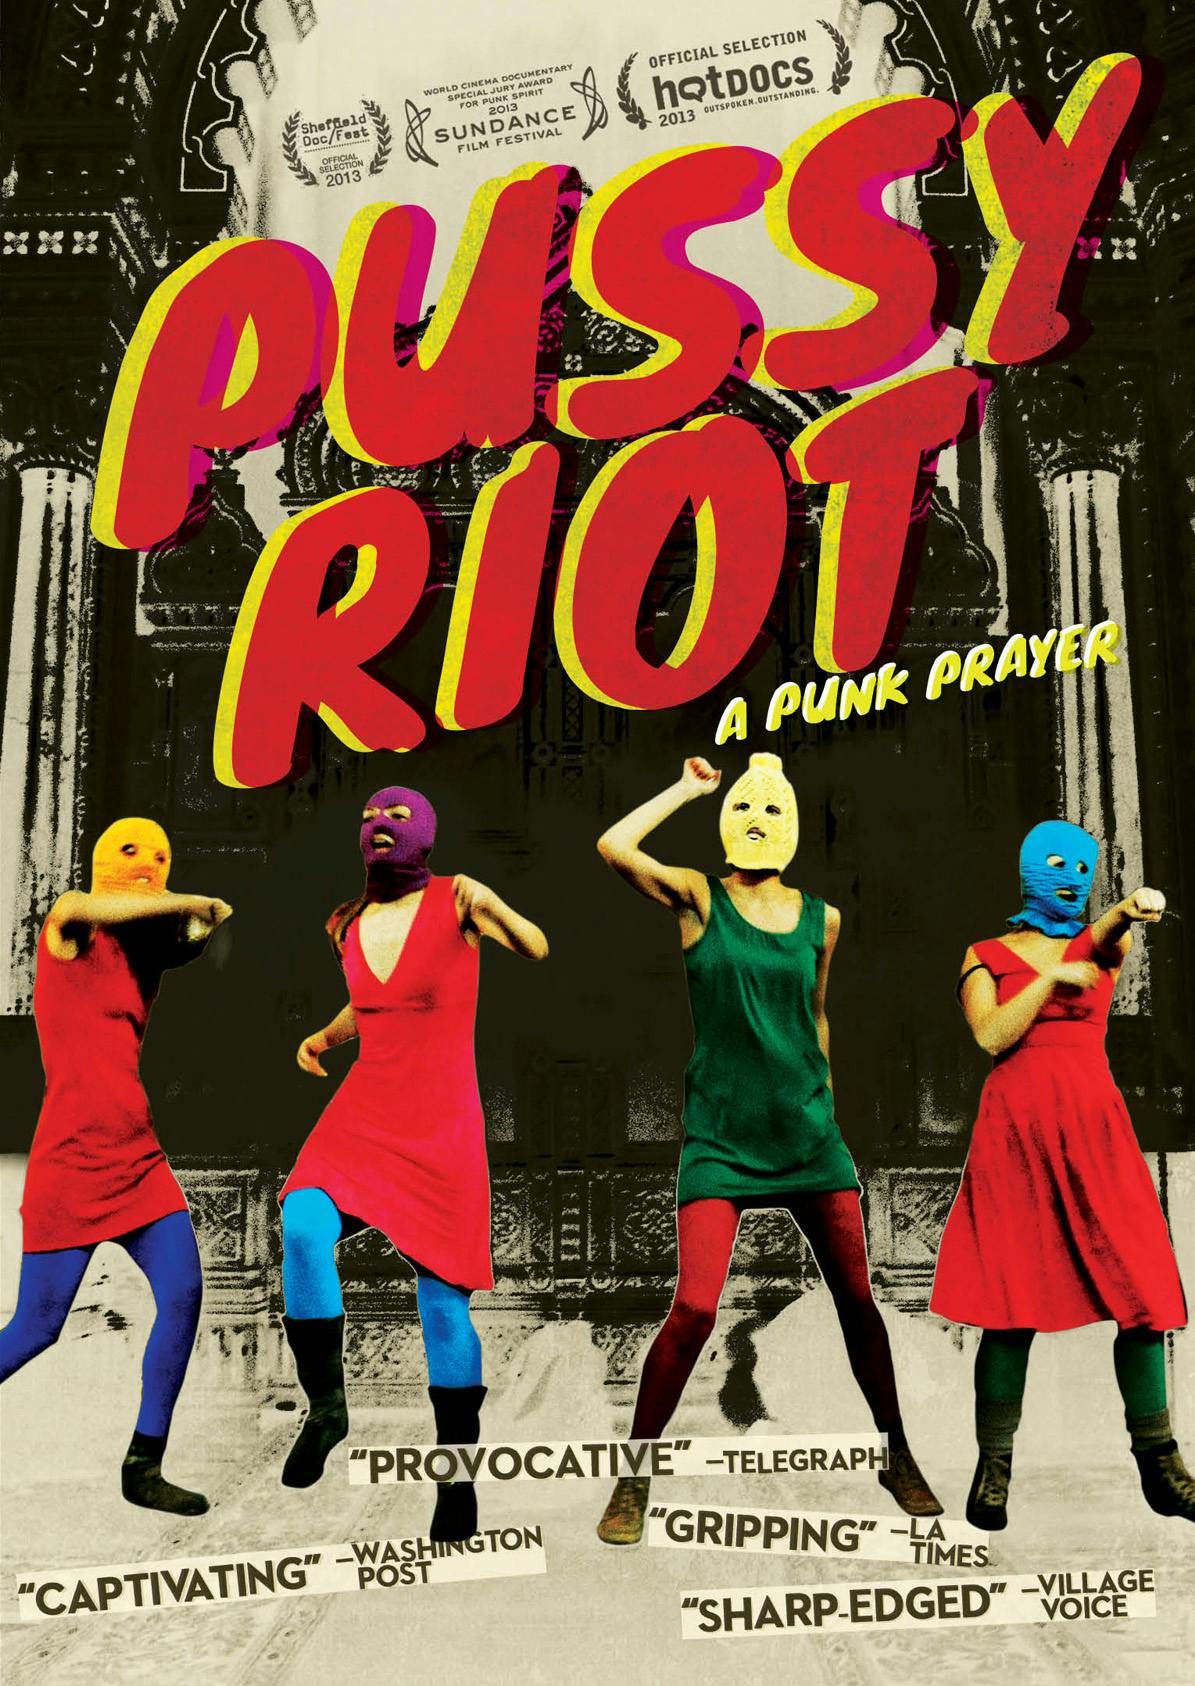 Pussy Riot, in NYC, Critiques Conditions in Russia